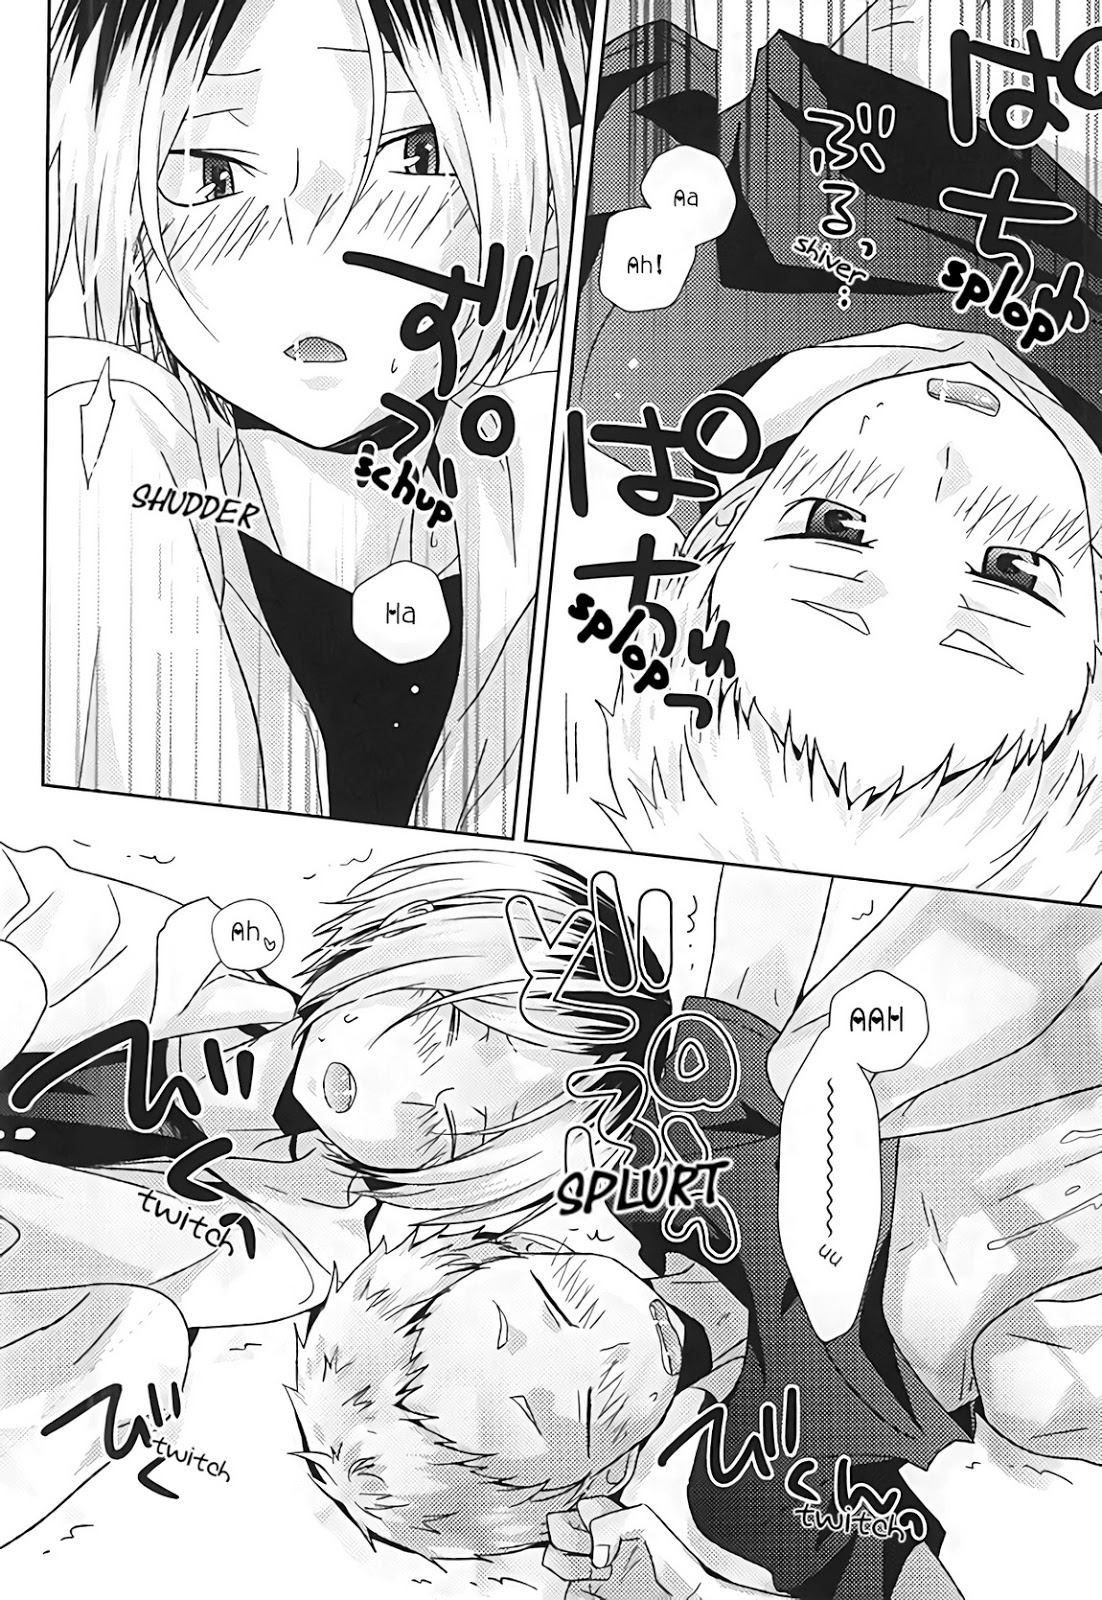 (SPARK10) [MOBRIS (Tomoharu)] HOWtoPLAY tutrial (Haikyuu!!) [English] [Homies over Hoes] page 31 full